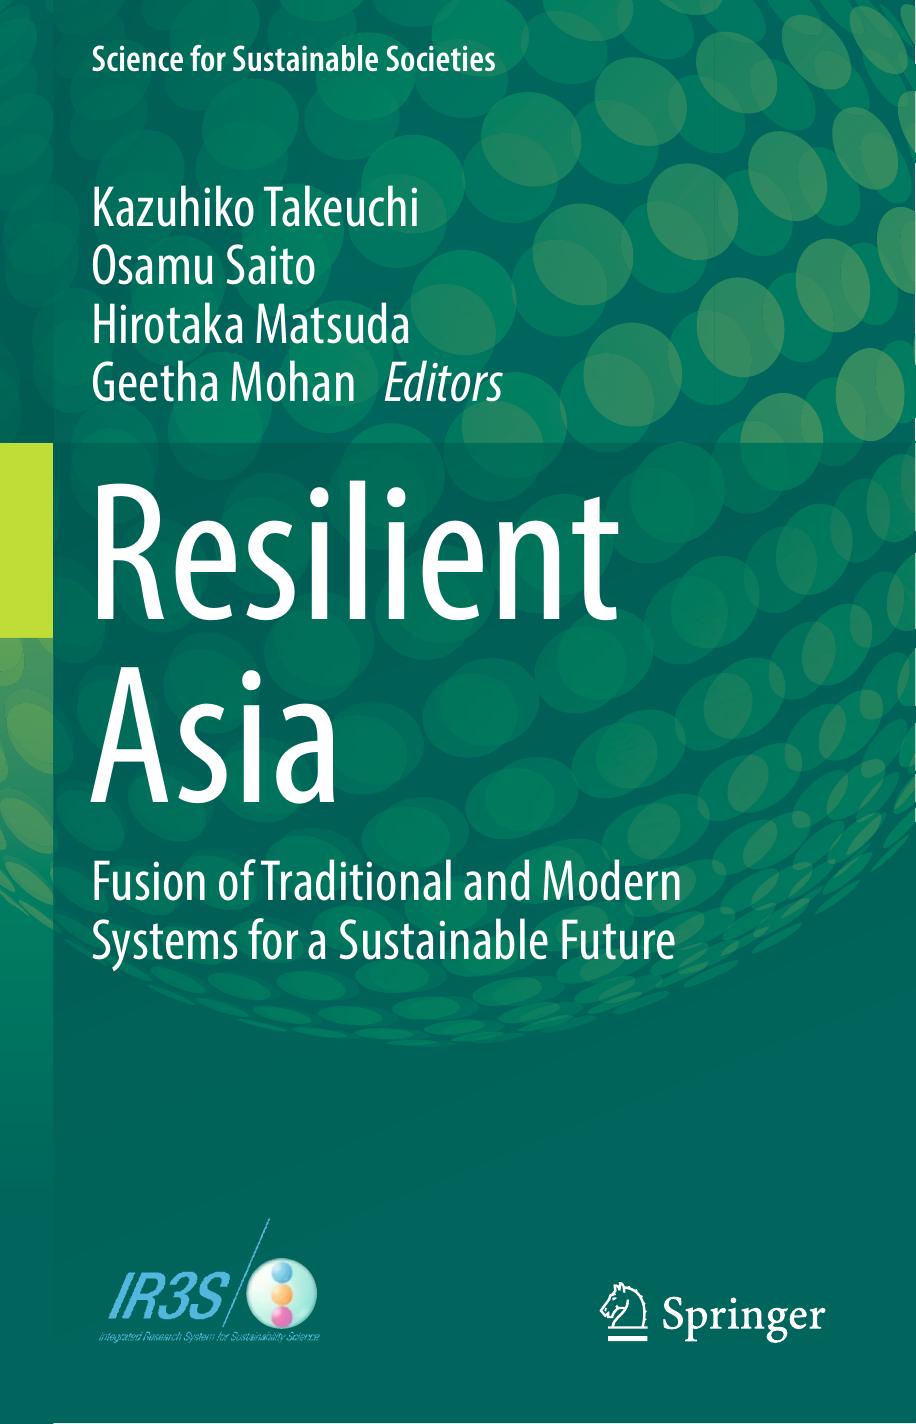 Resilient Asia